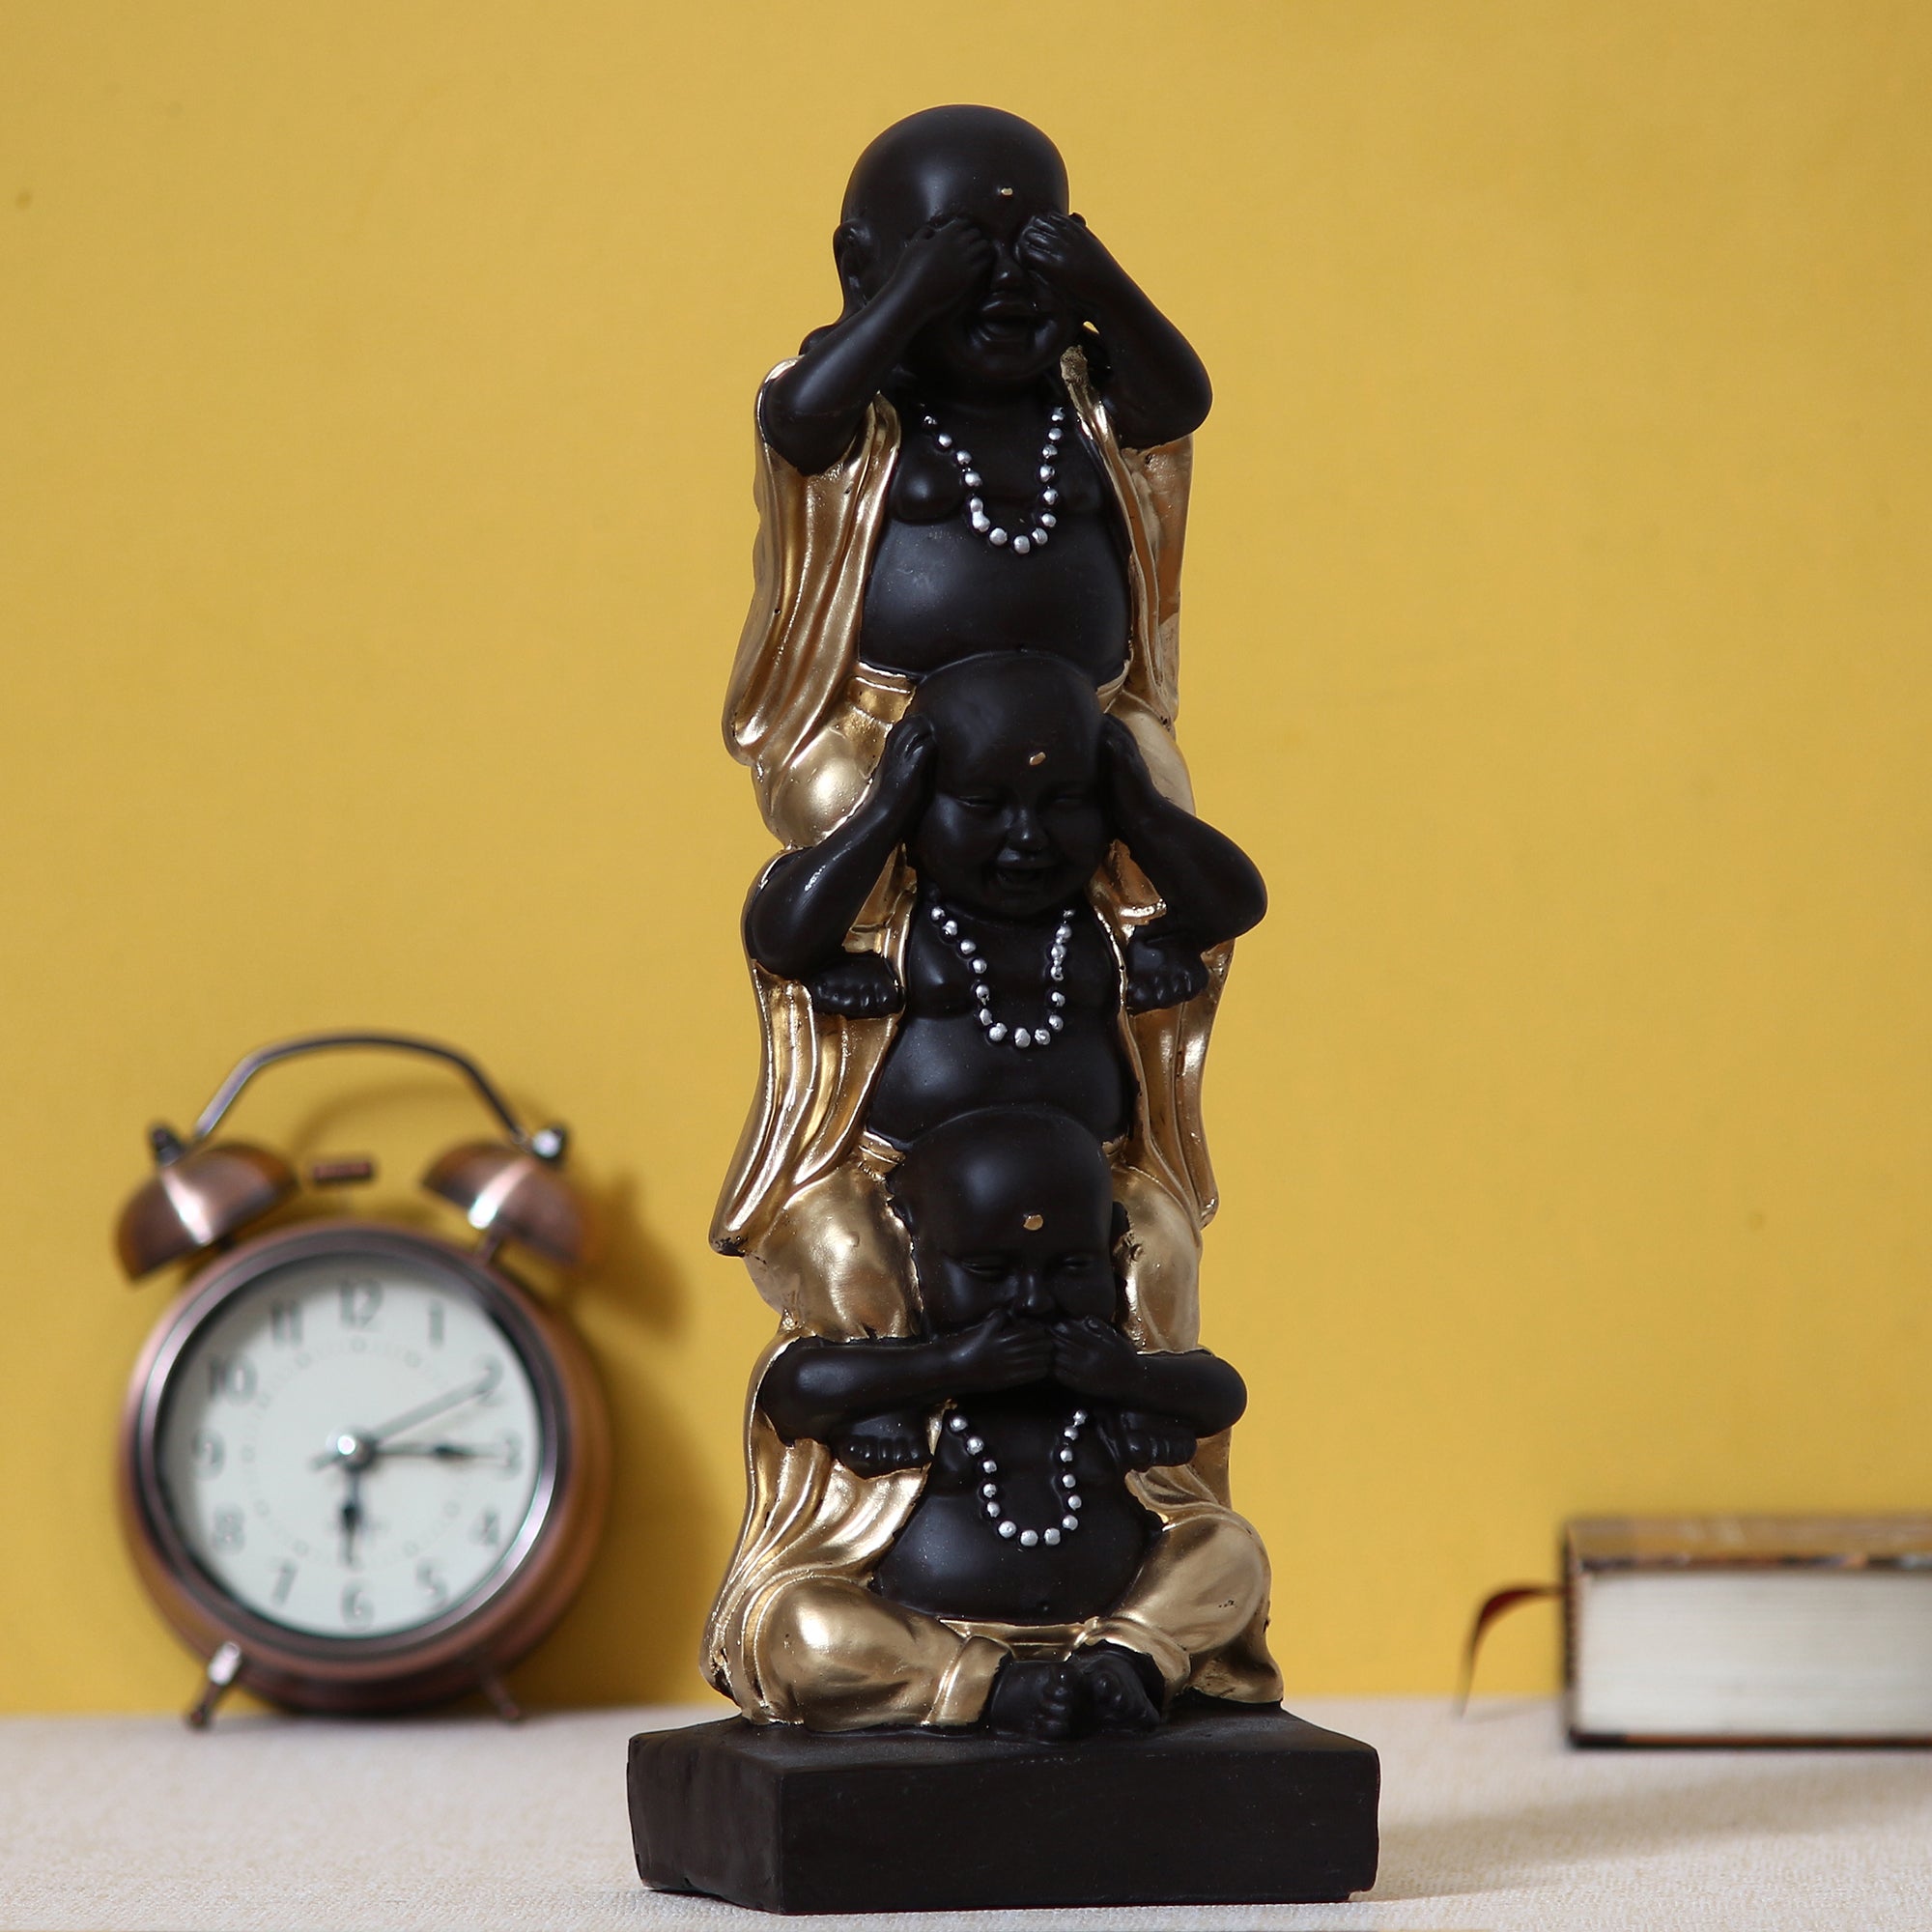 Polyresin Black and Golden Set of 3 Laughing Buddha Statue Standing on each other Decorative Showpiece 6